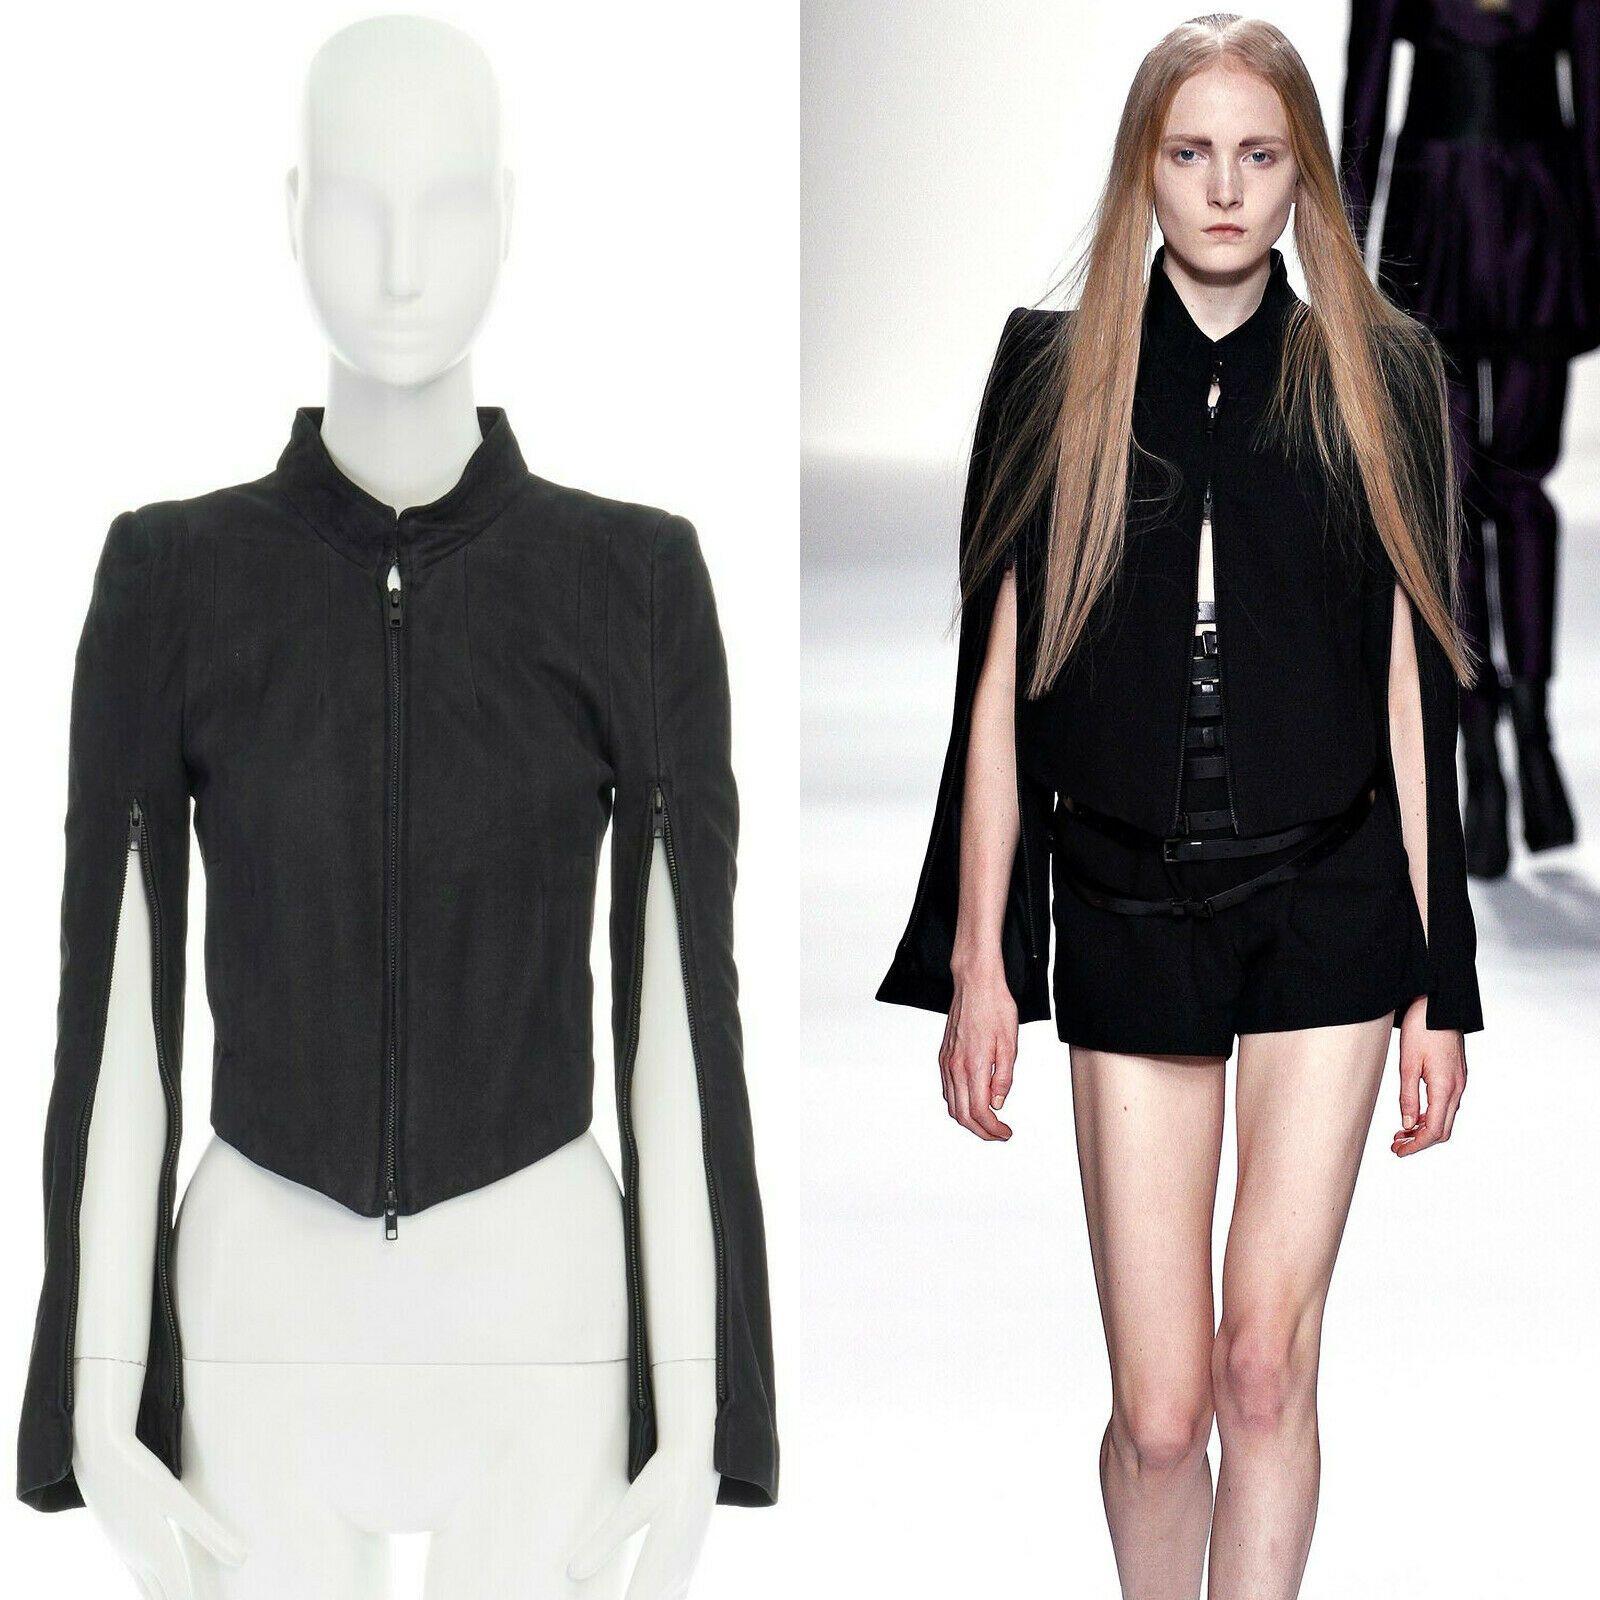 runway ANN DEMEULEMEESTER black leather convertible zip sleeves crop jacket XS
ANN DEMEULEMEESTER
100% leather. Stand collar. Dual hook eye closure at neck. 
Zip front closure. Padded shoulder. Long sleeves. 
Zipped trimmed along sleeves. Cropped